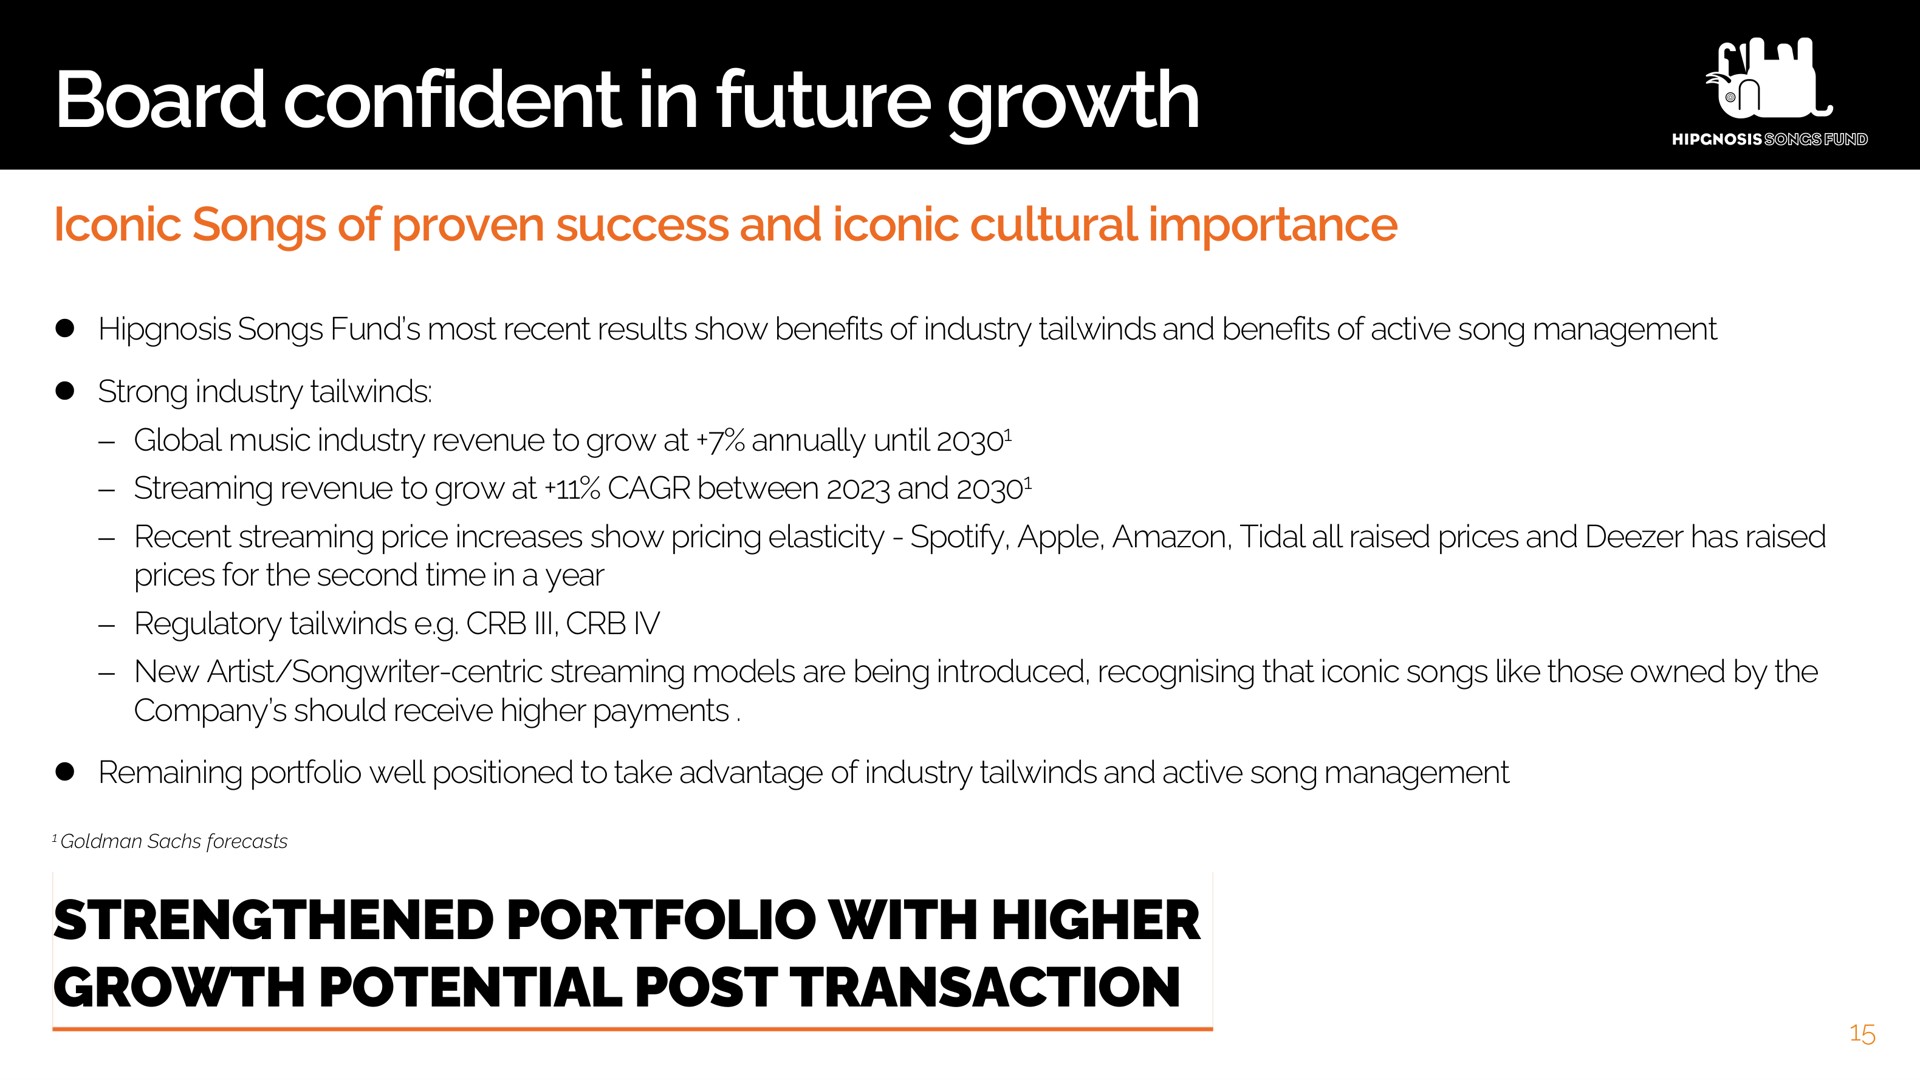 board confident in future growth strengthened portfolio with higher potential post transaction | Hipgnosis Songs Fund